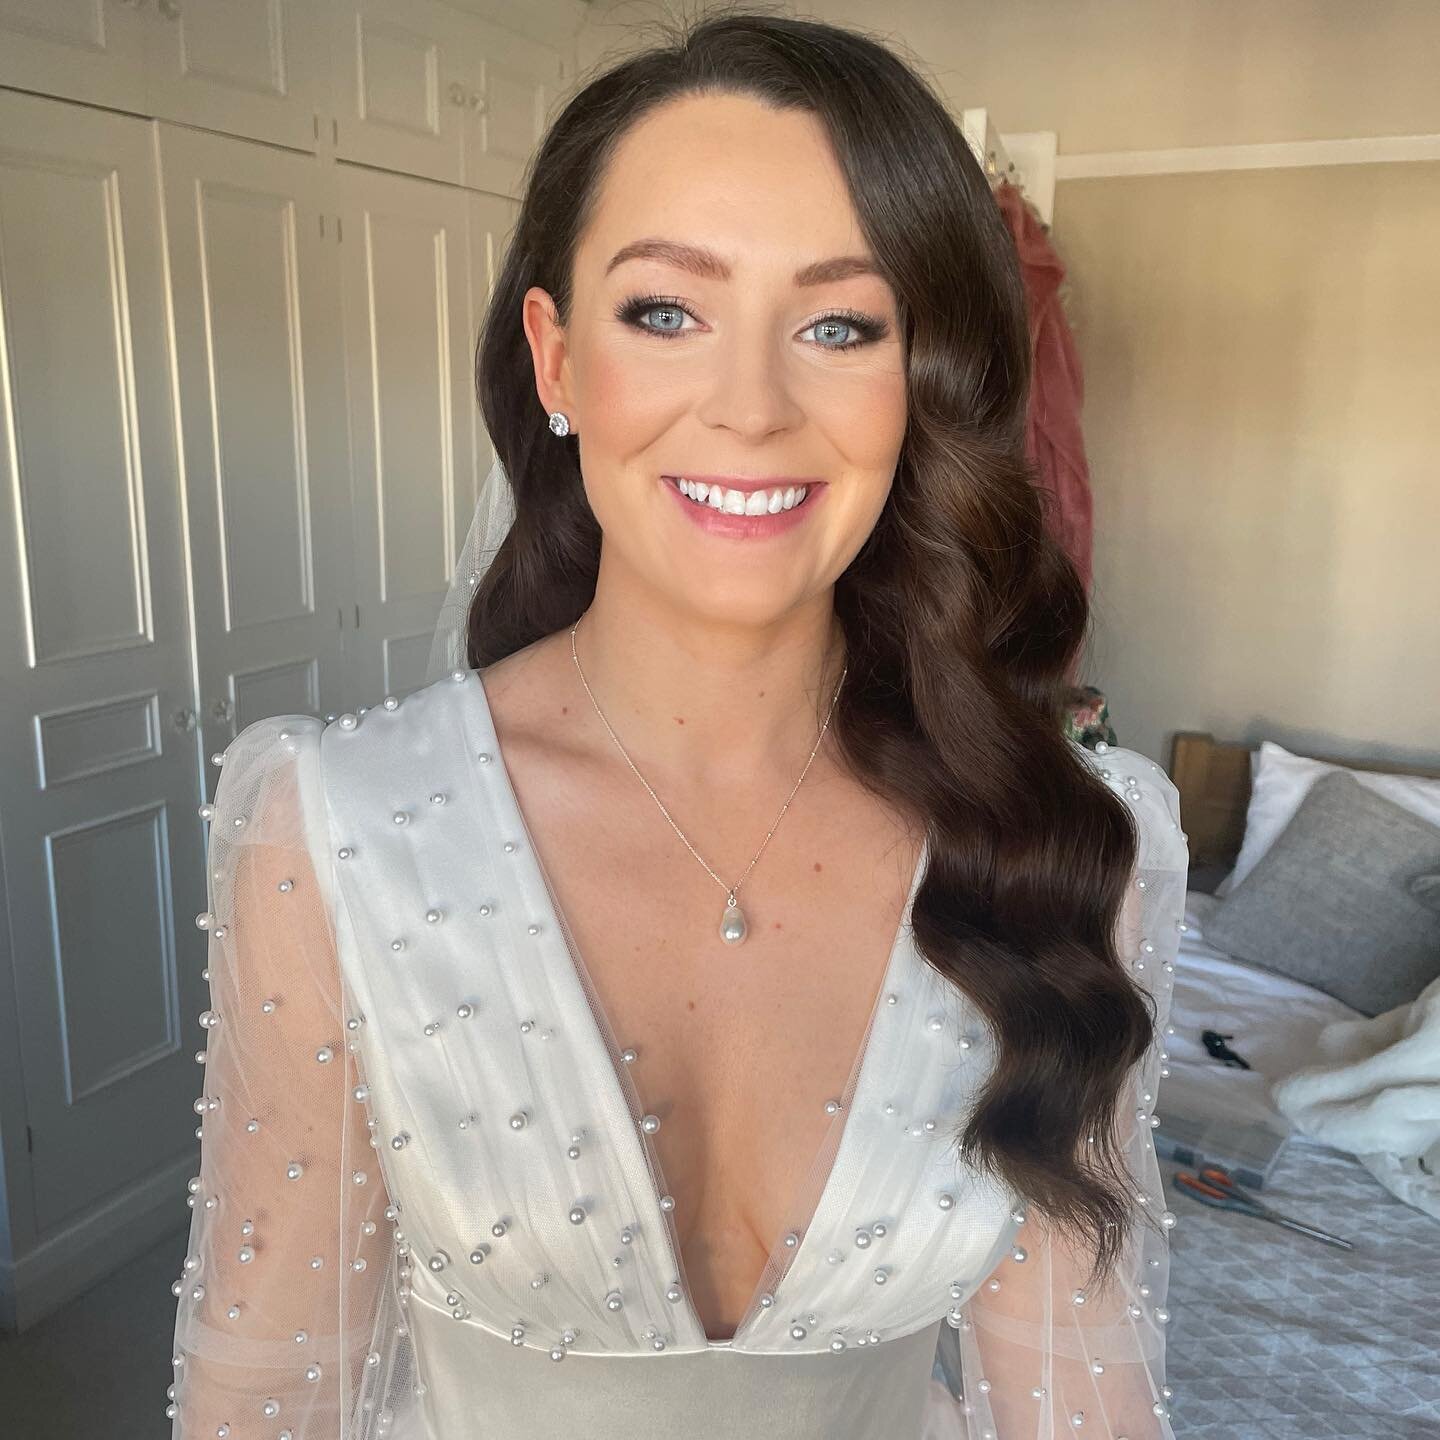 Out with a bang! Absolute beaut Rachel on her wedding morning, classic hollywood waves styled by my fave gal @sonyajaynebridalhair 🎄🥂✨Today&rsquo;s wedding marked my last wedding before I hang up by brushes and start nesting for our new arrival. I 